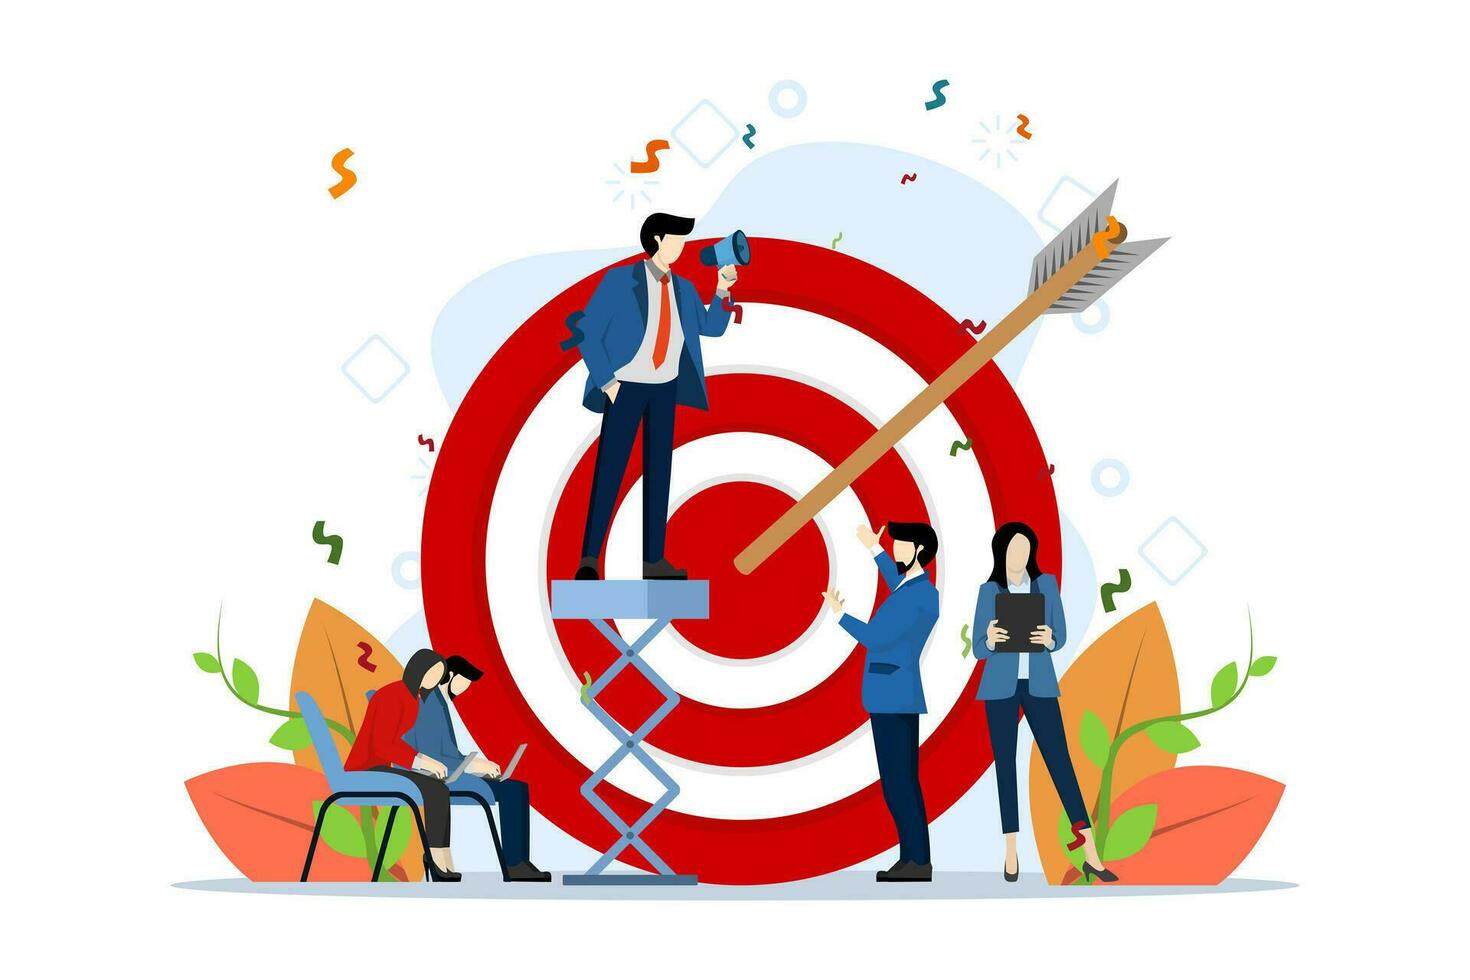 Marketing strategy concept. Business team achieving goal. People near big target with arrows. target company goals, company vision and mission, flat vector illustration isolated on white background.